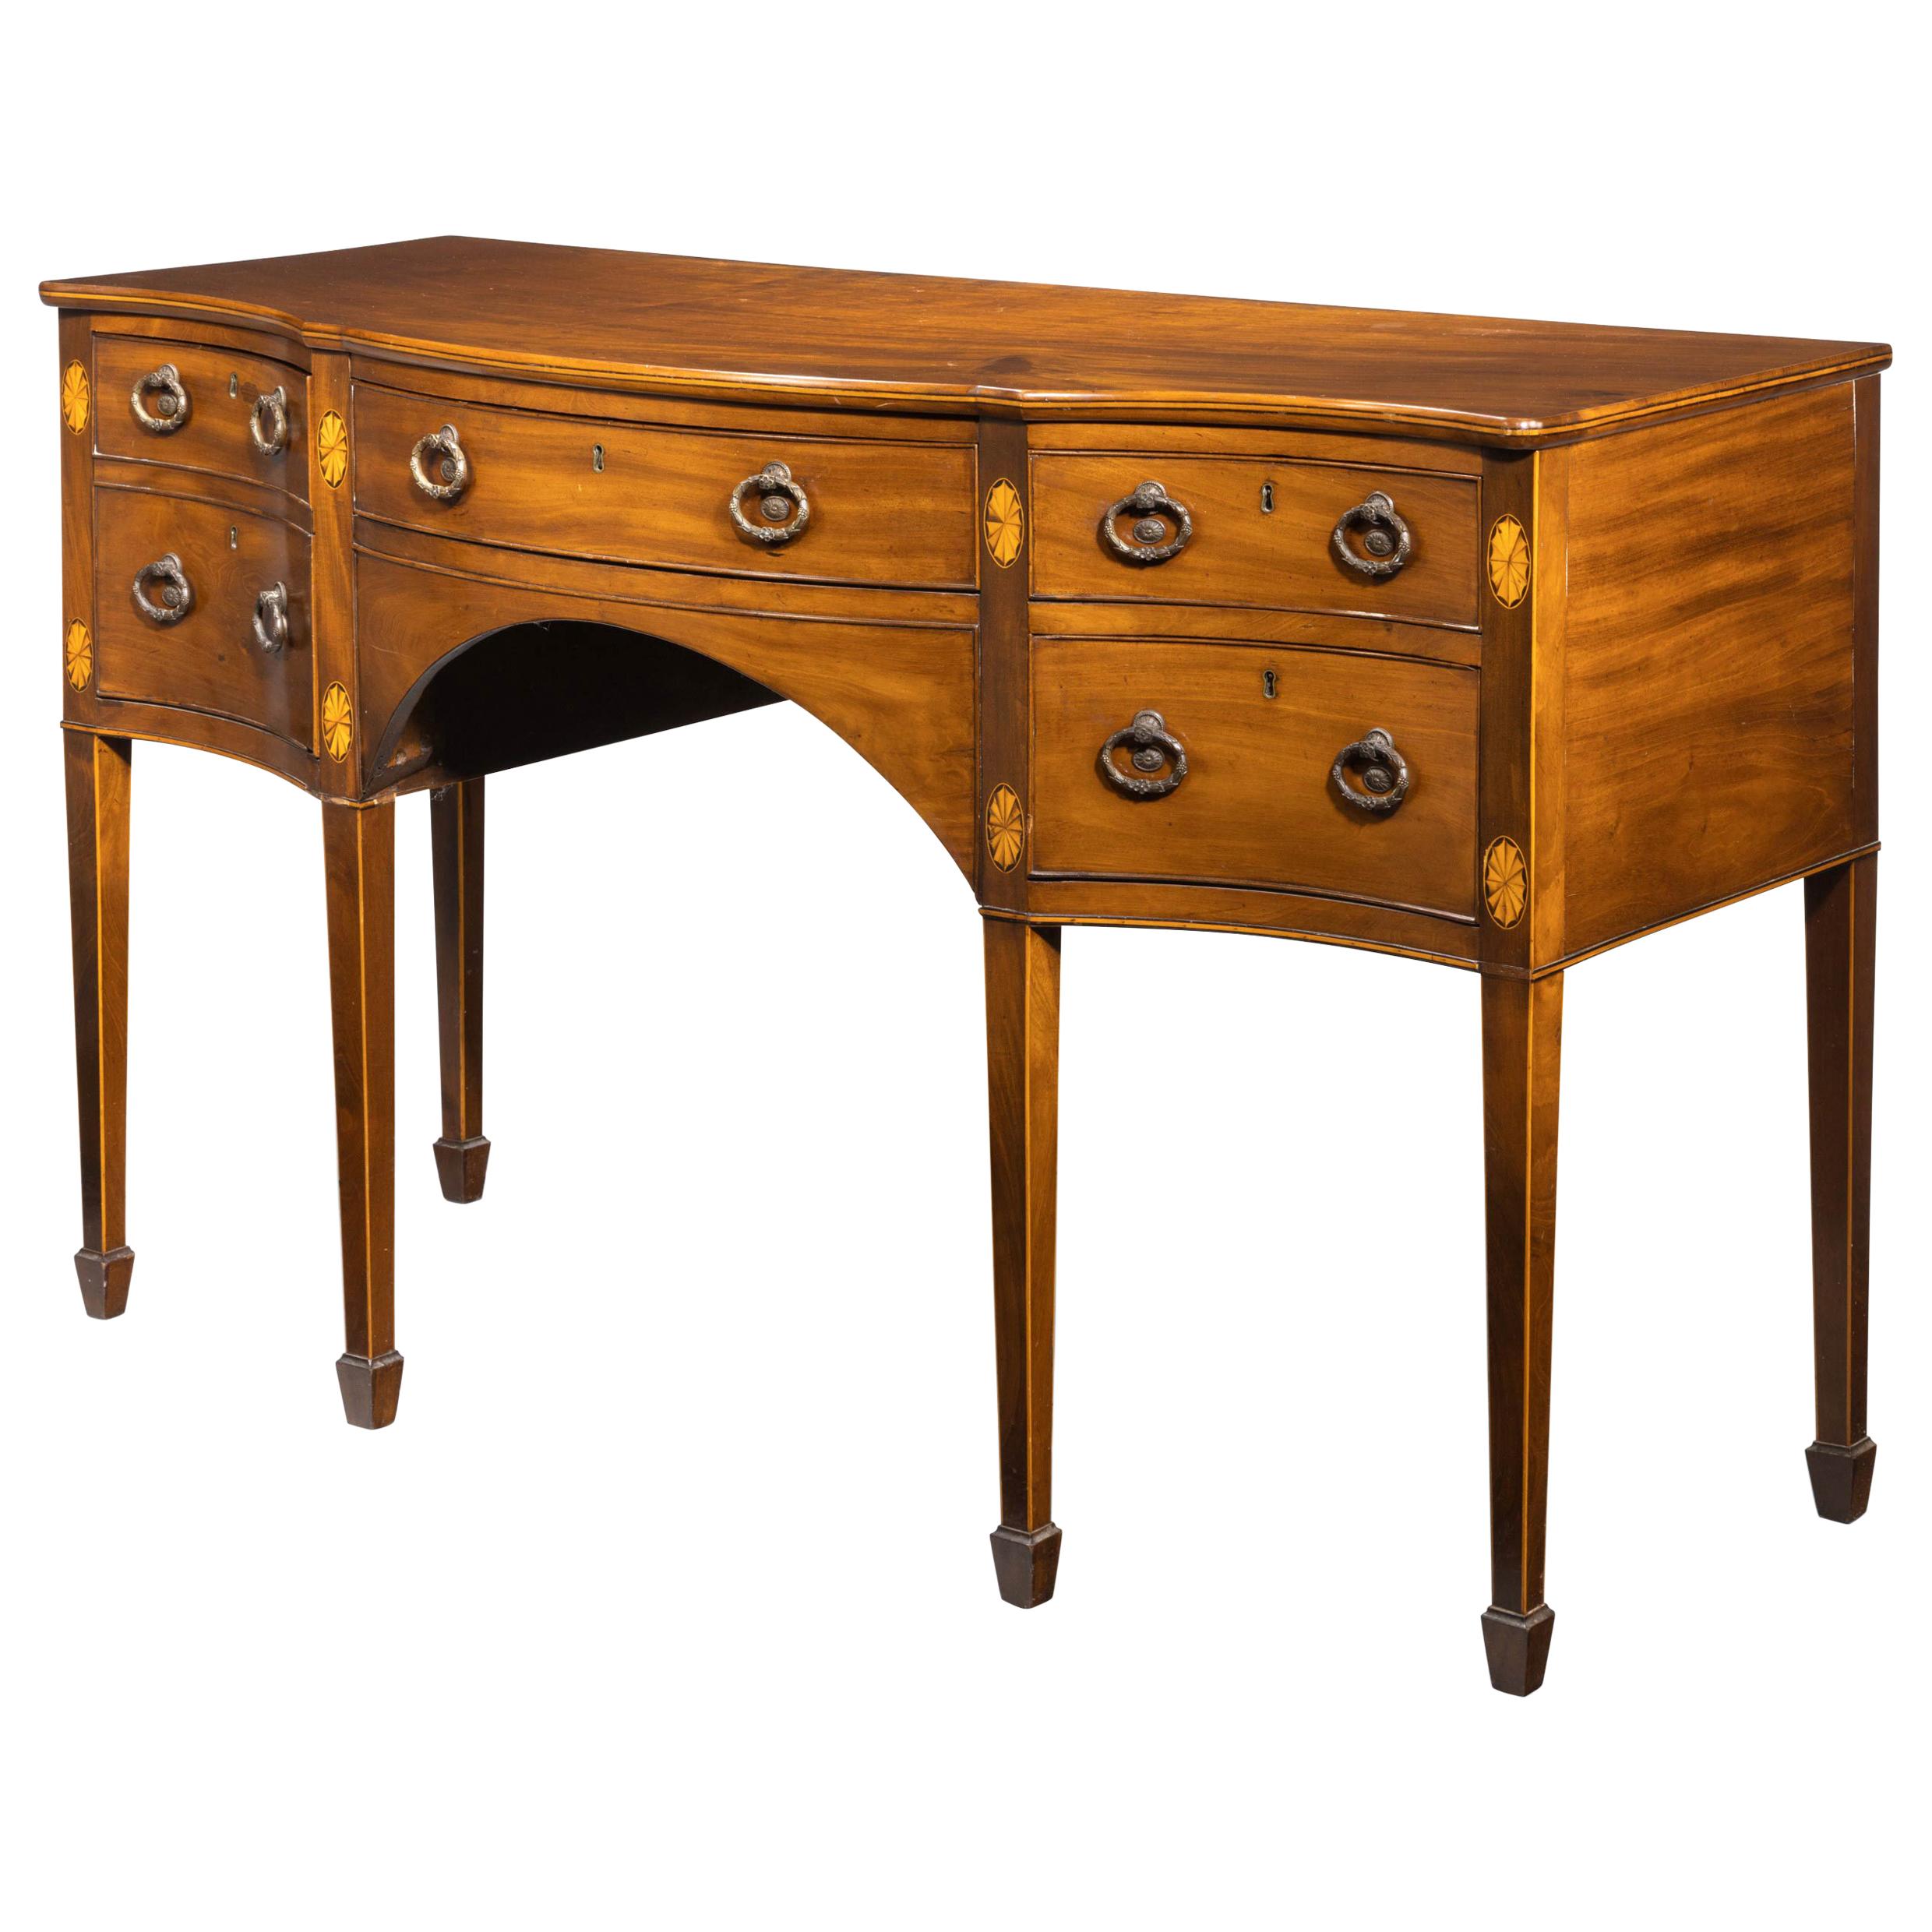 Very Fine George III Period Sideboard by Gillows of Lancaster